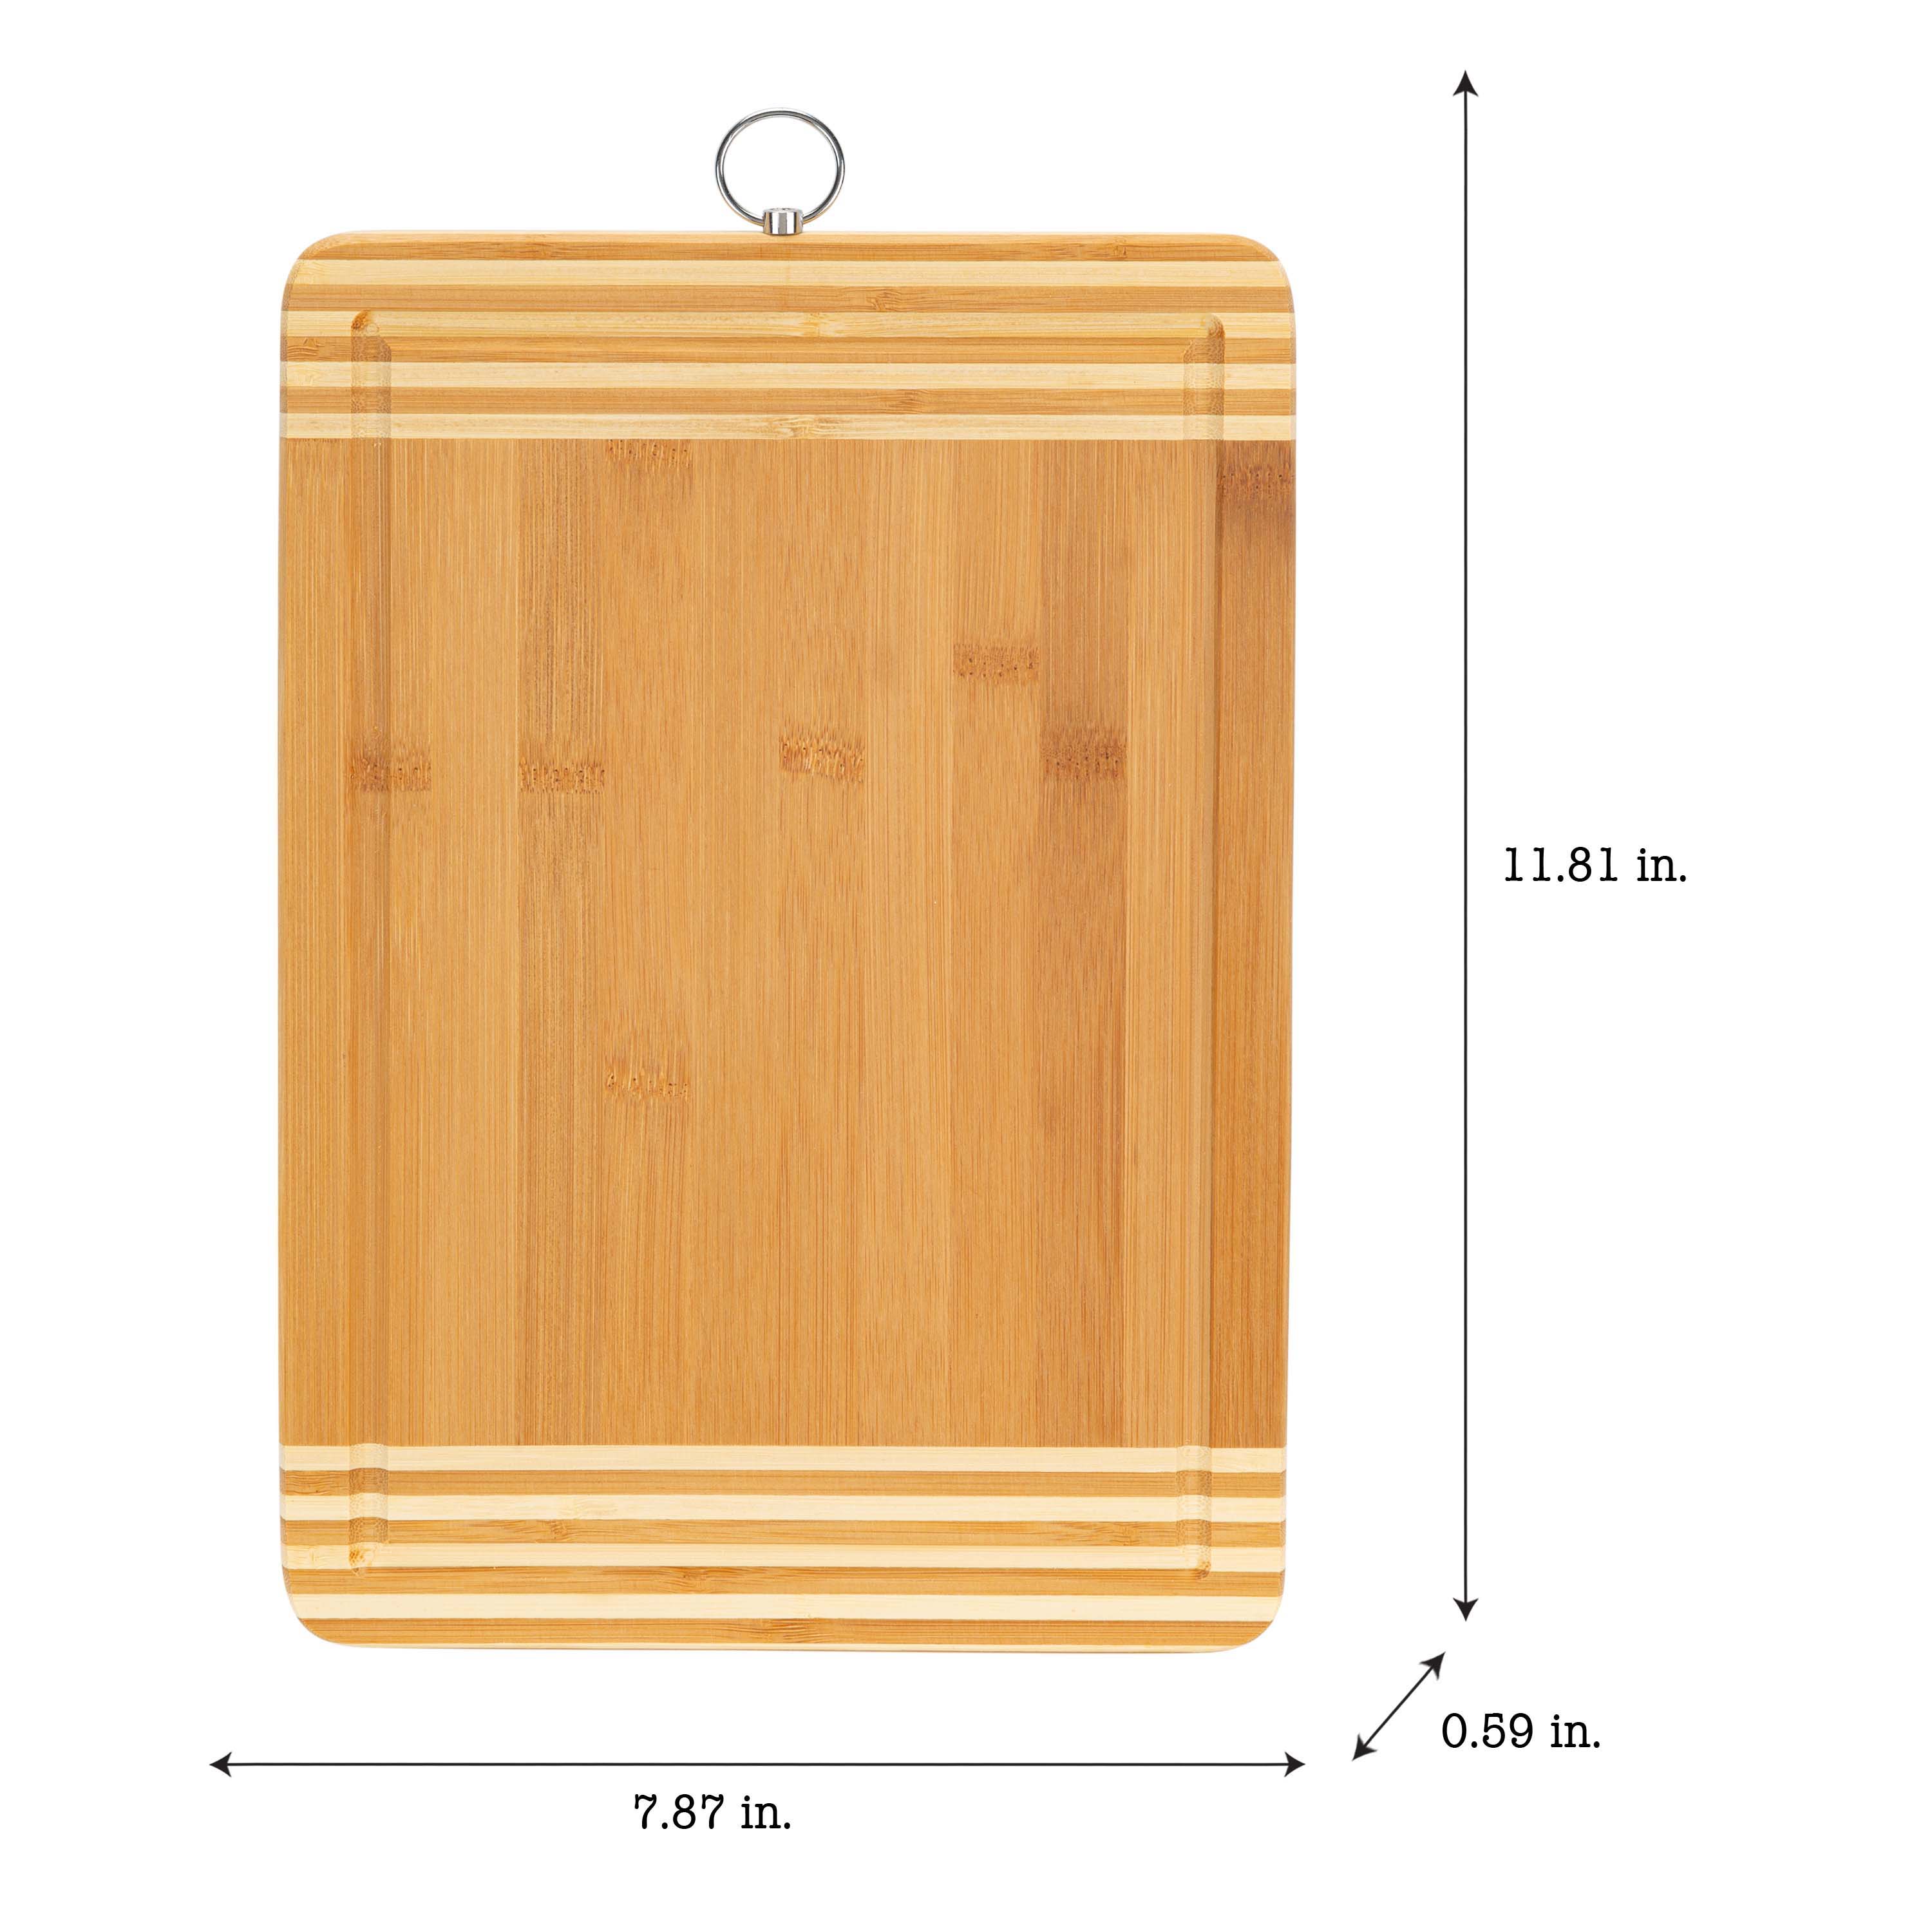 Bamboo Cutting Chopping Board with Containers 4 Storage Drawer w/ 4 Grater  Tool